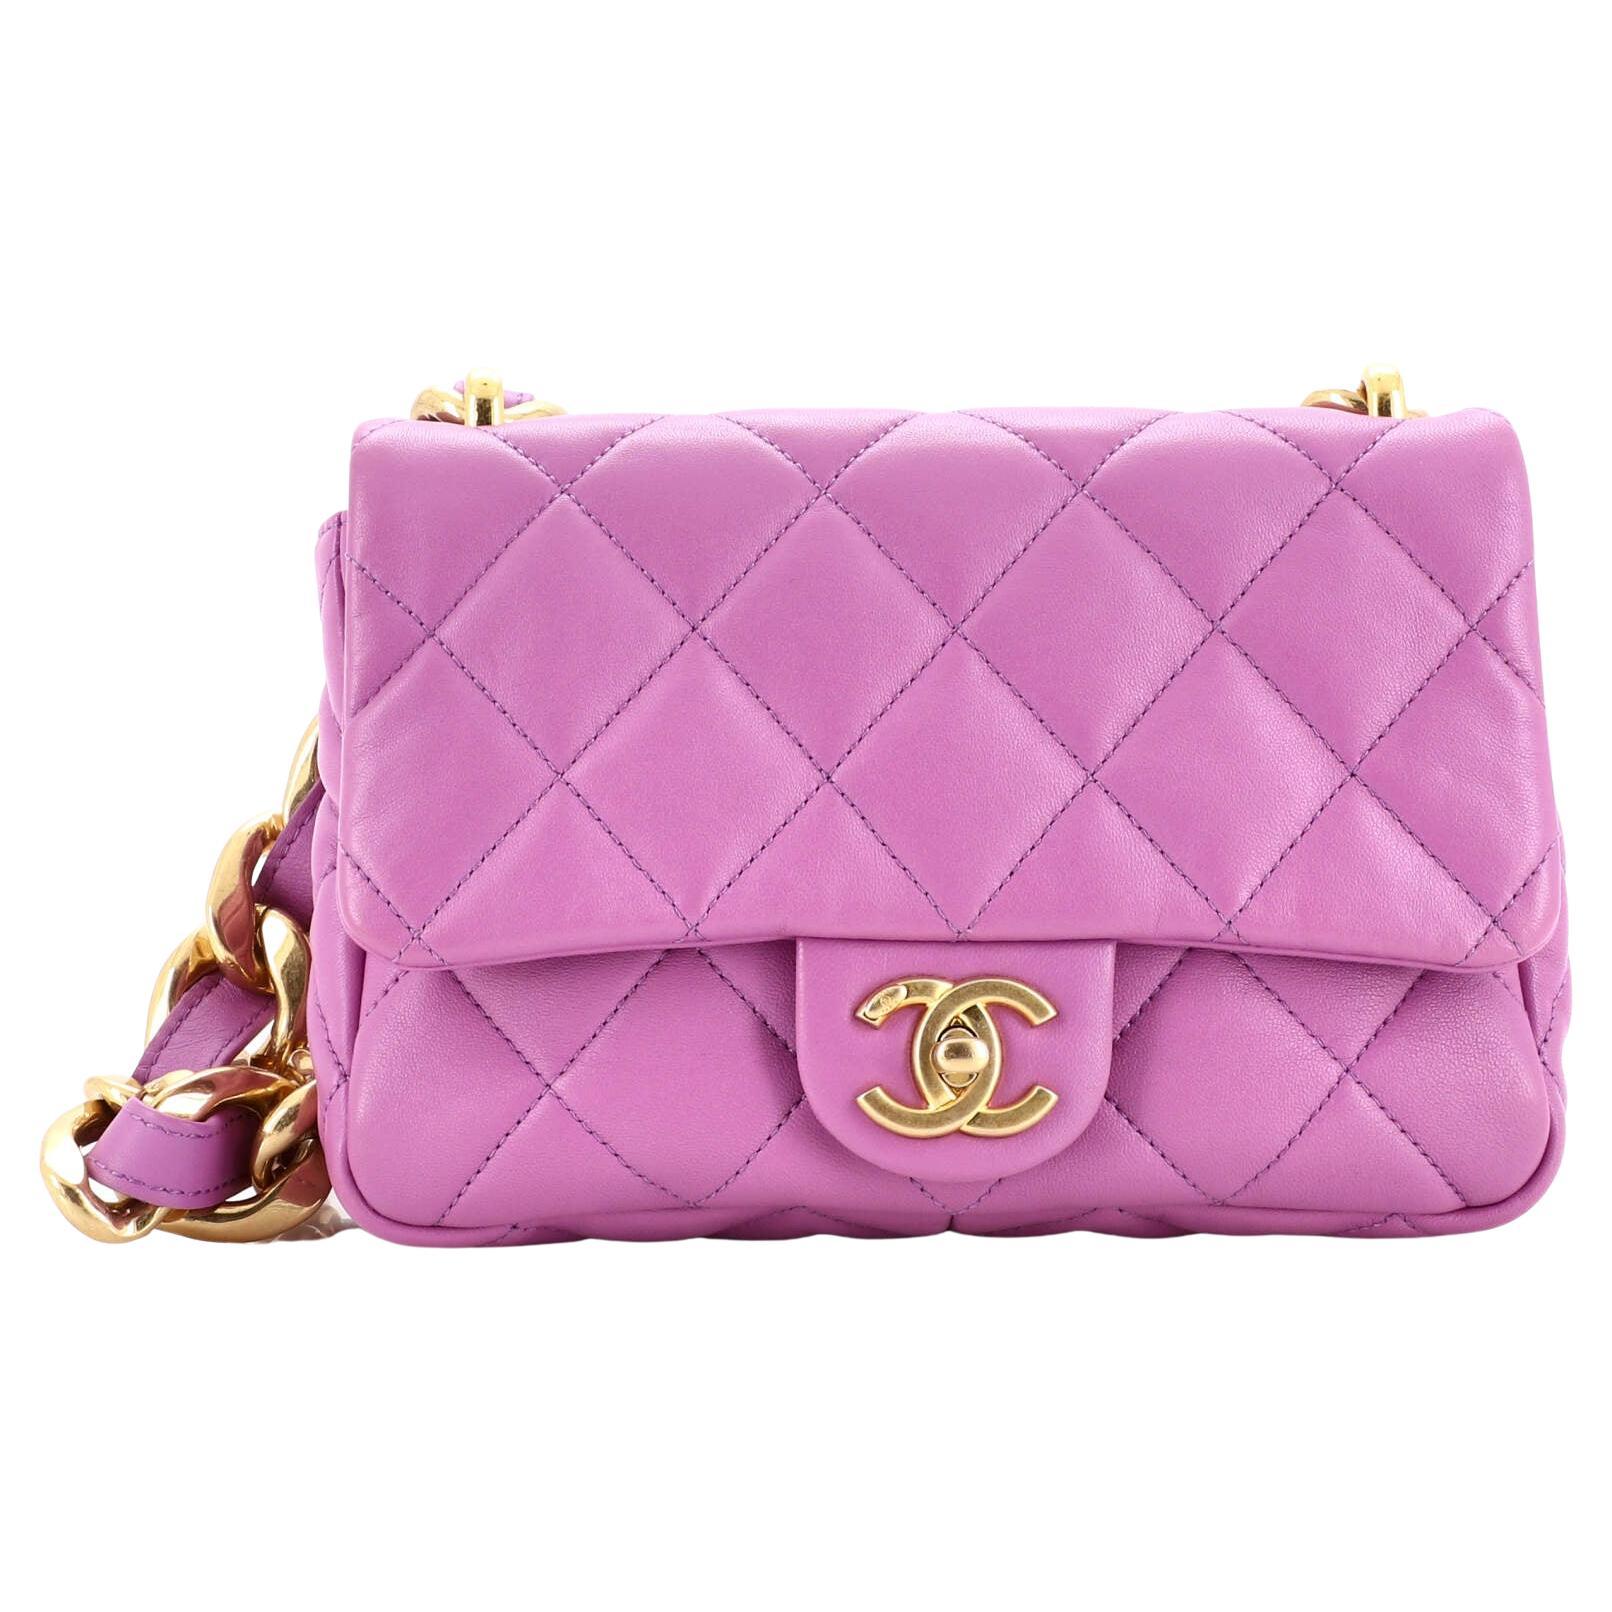 Chanel Funky Town Bag - 4 For Sale on 1stDibs